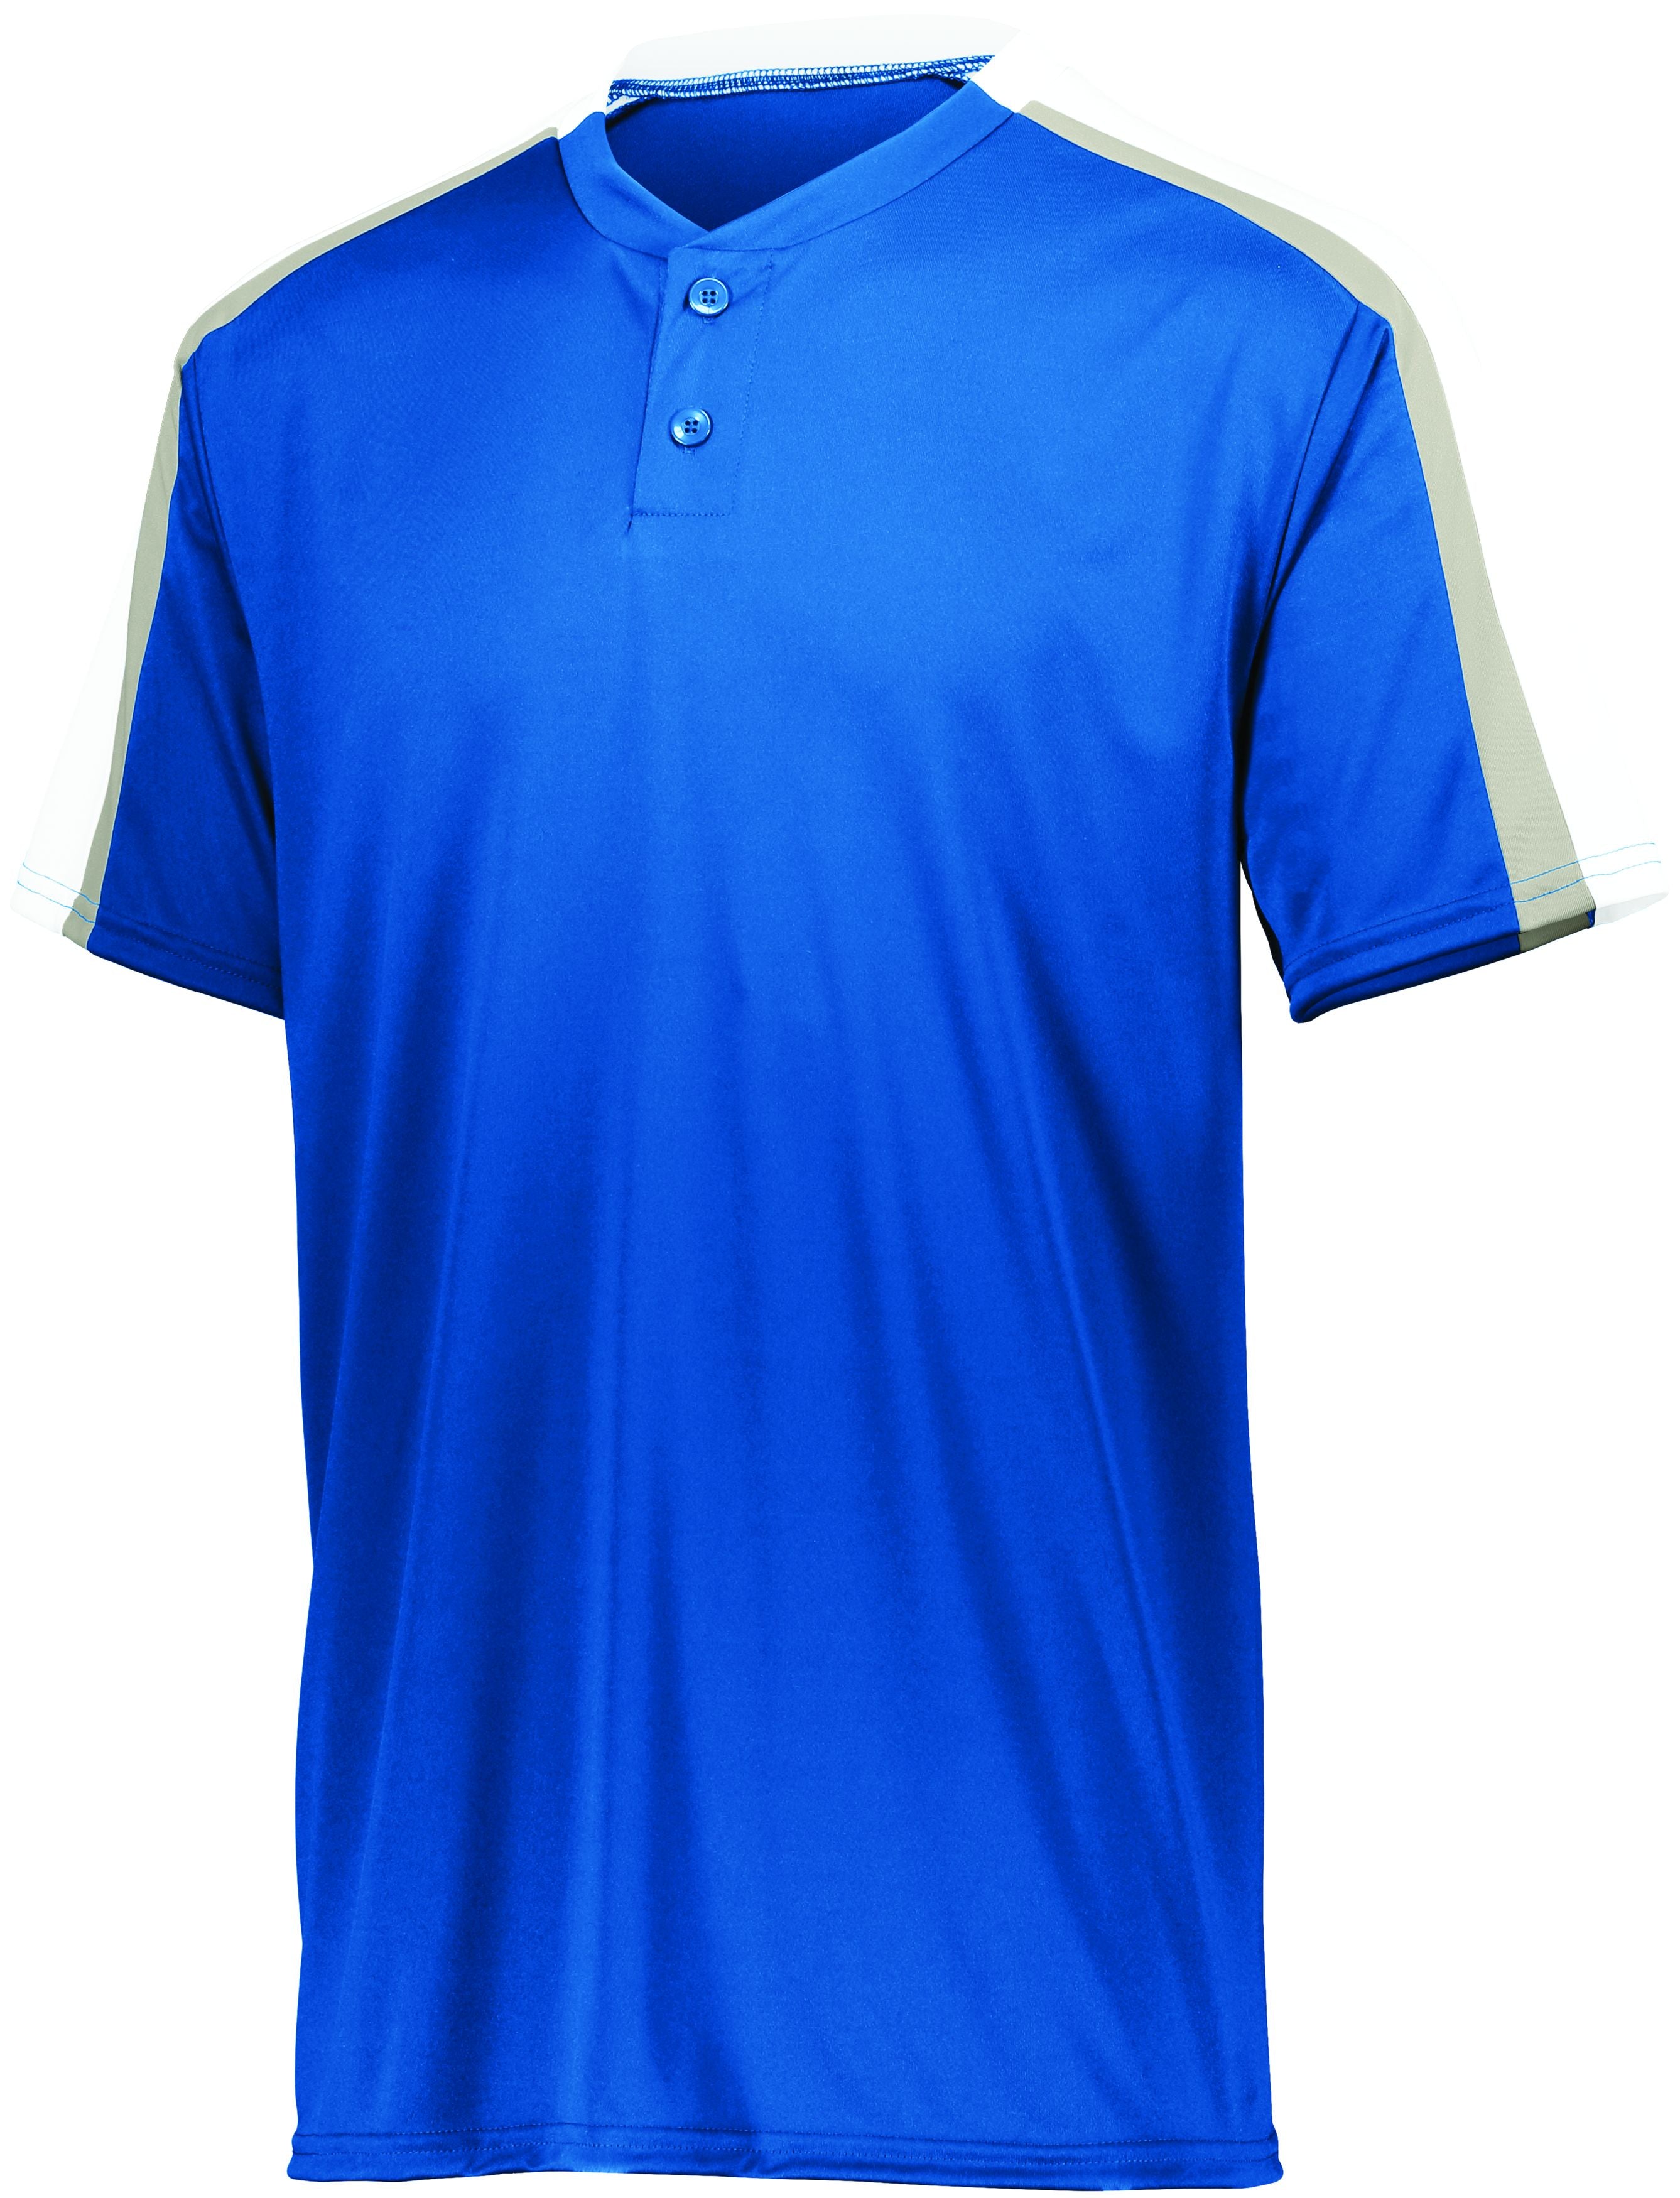 Augusta Sportswear Power Plus Jersey 2.0 in Royal/White/Silver Grey  -Part of the Adult, Adult-Jersey, Augusta-Products, Baseball, Shirts, All-Sports, All-Sports-1 product lines at KanaleyCreations.com